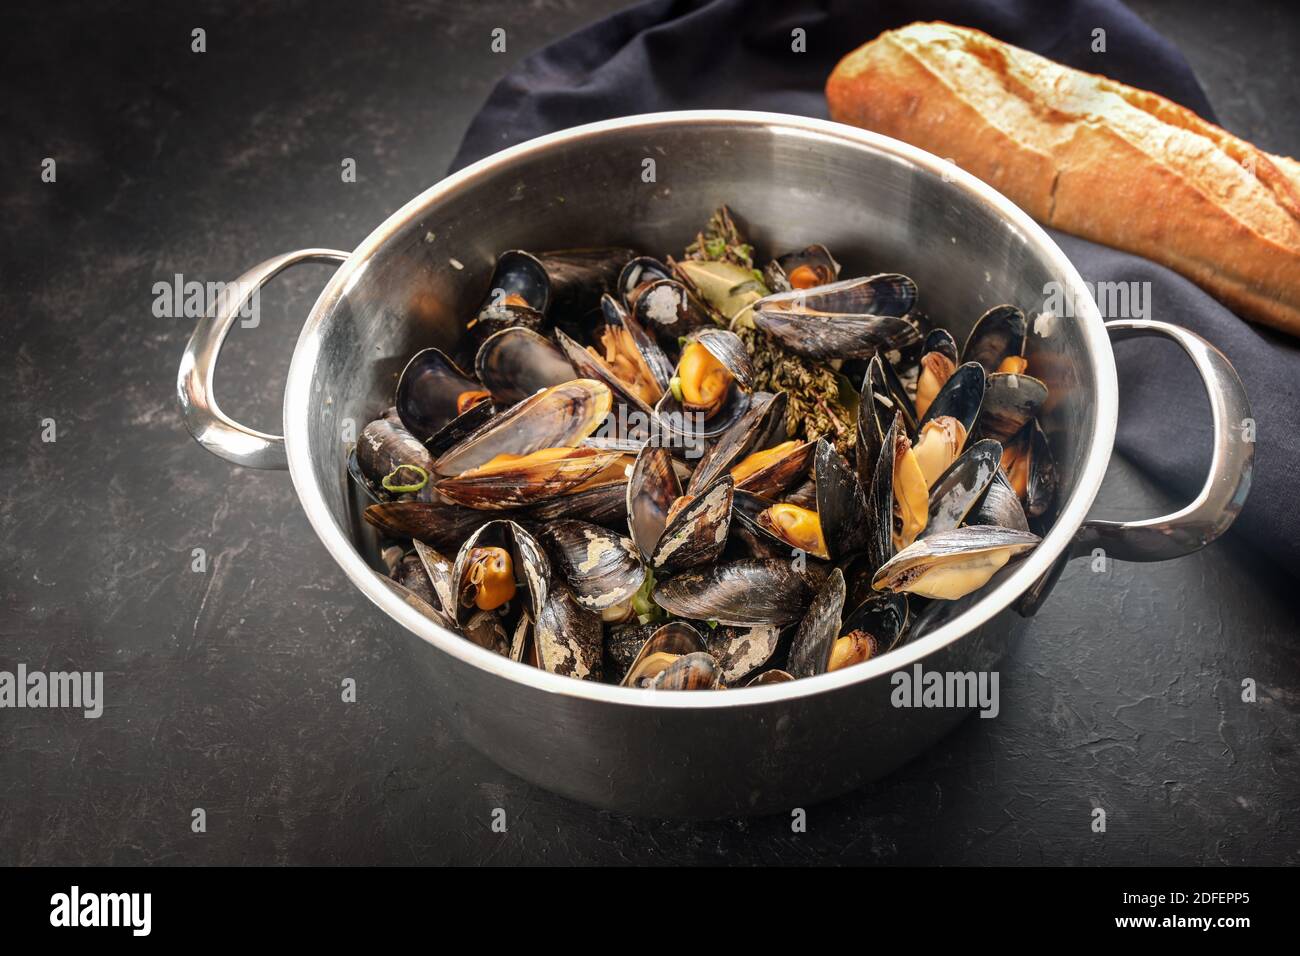 Freshly cooked mussels served in a steel pot with bread, on a dark slate table, delicious seasonal seafood meal, copy space, selected focus, narrow de Stock Photo